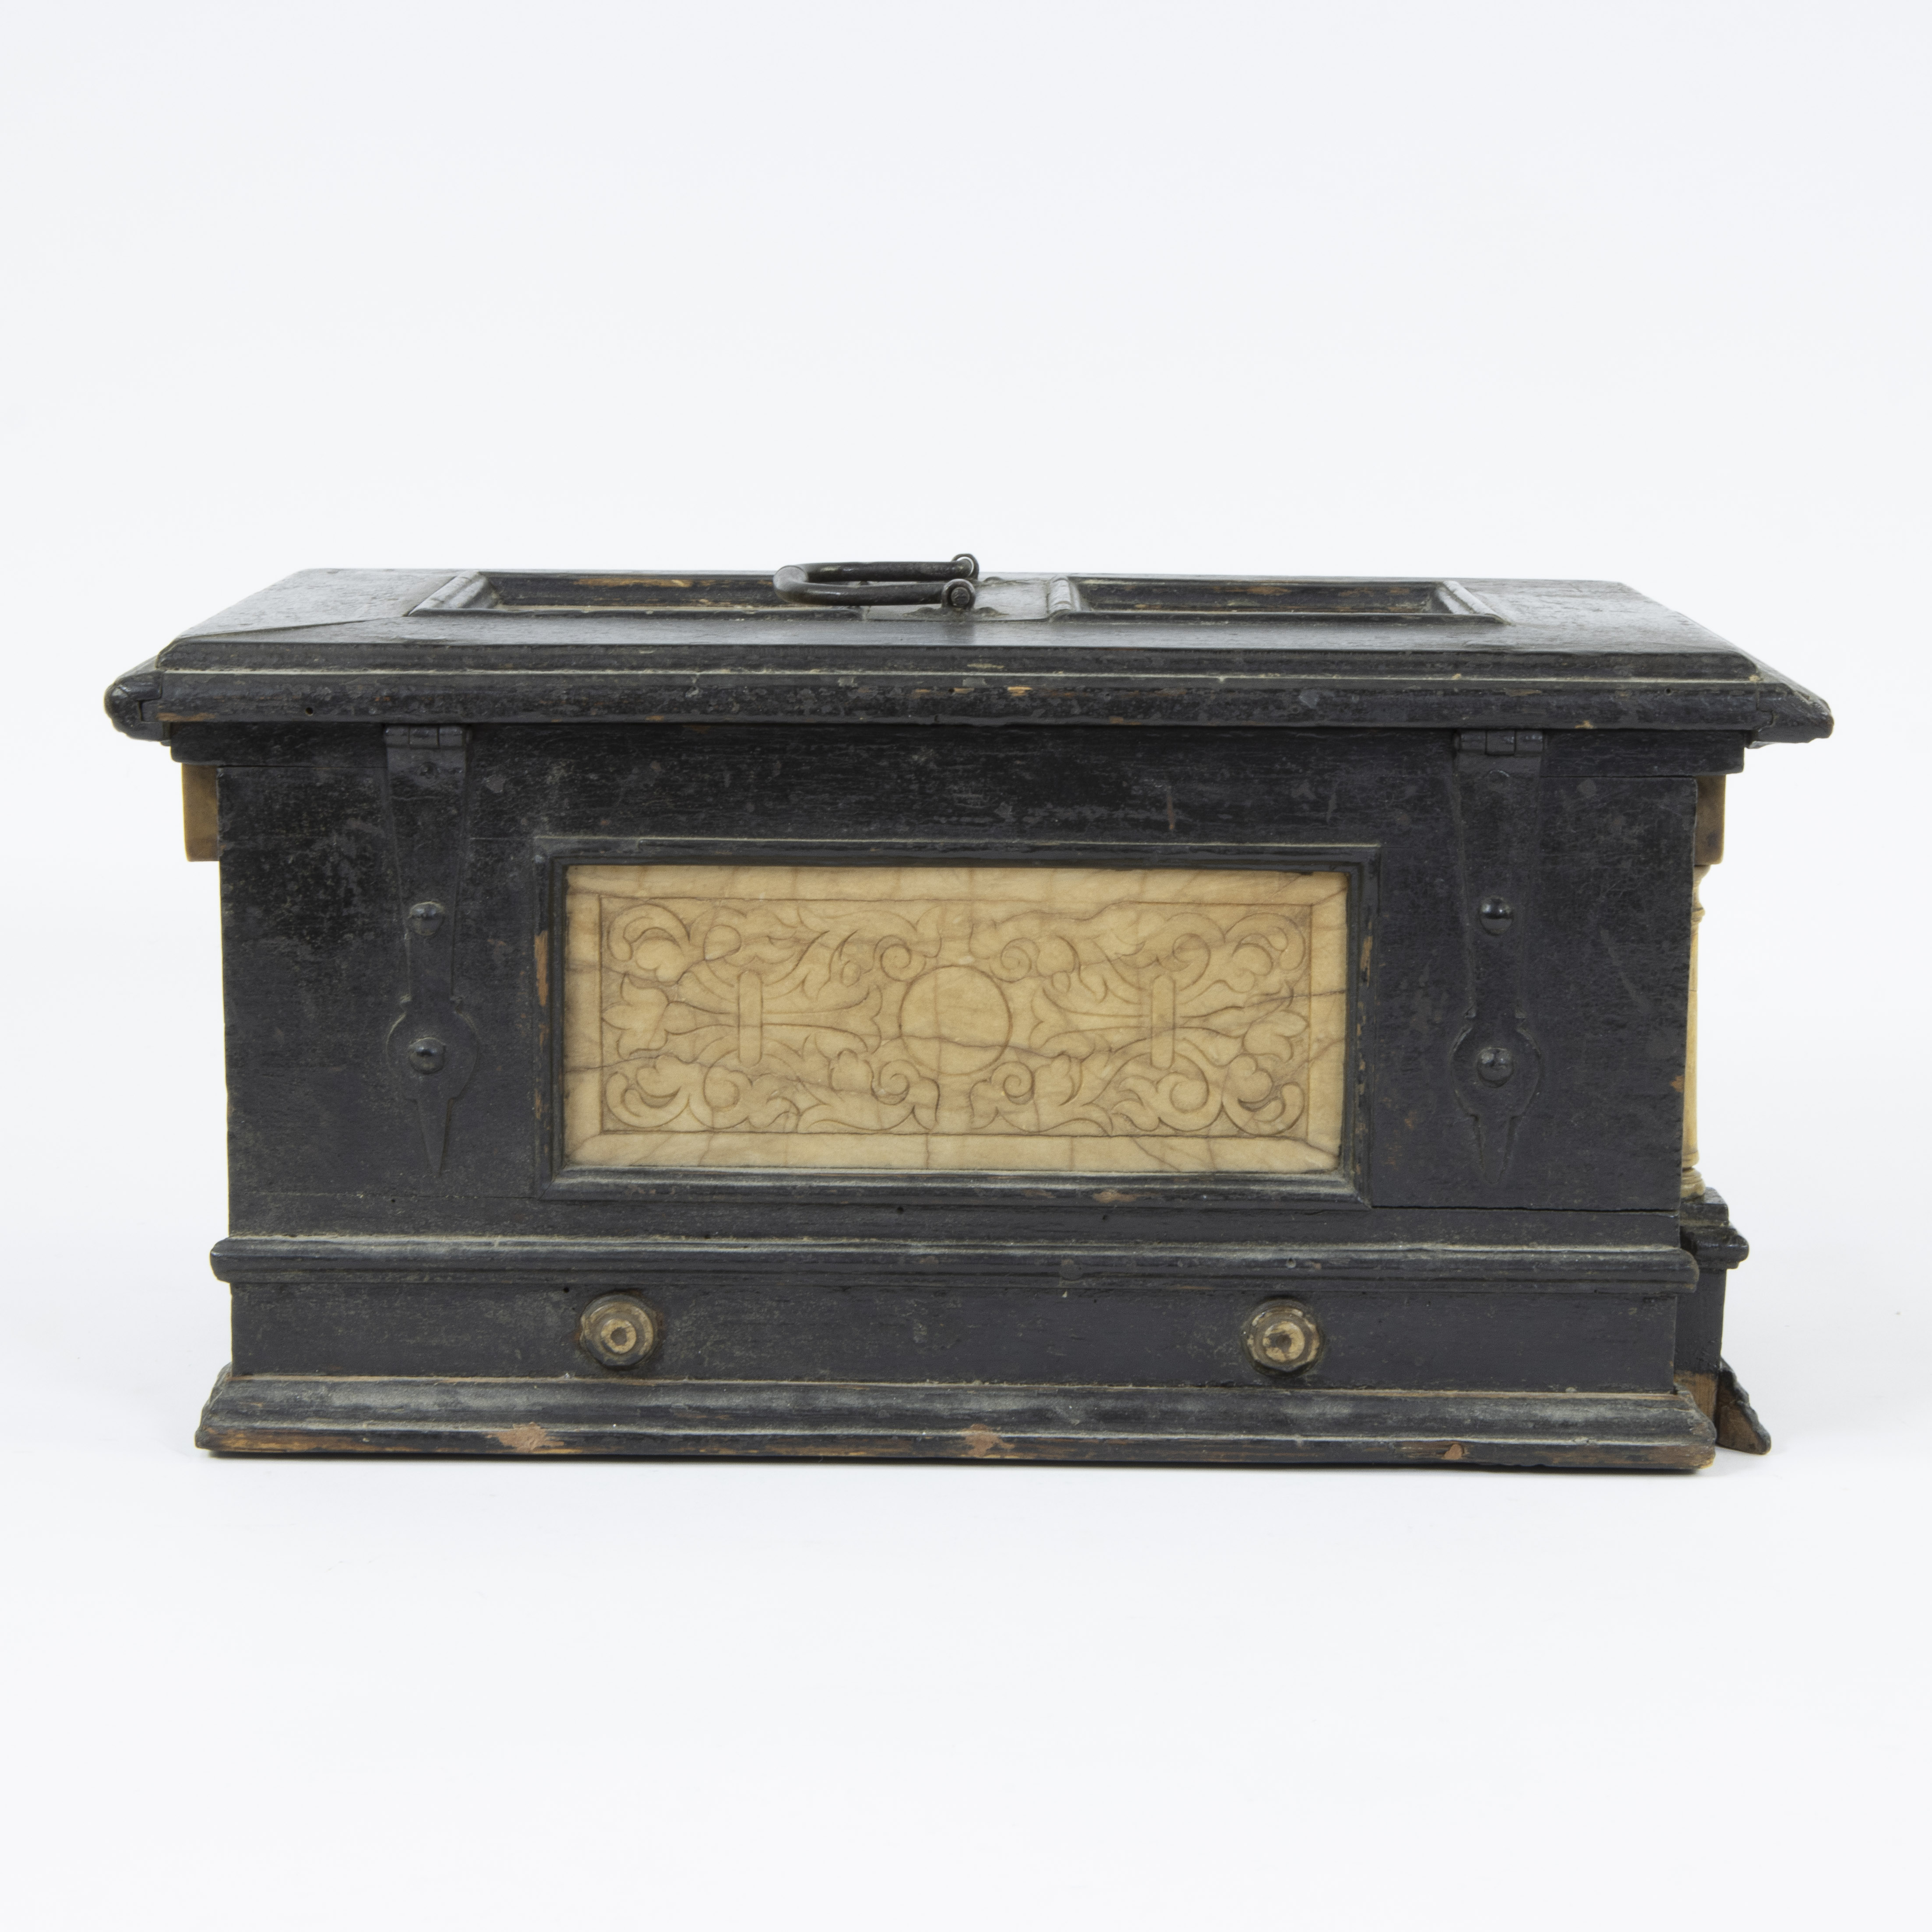 An early 17th century ebonised and alabaster table casket, Malines, circa 1630 - Image 4 of 6